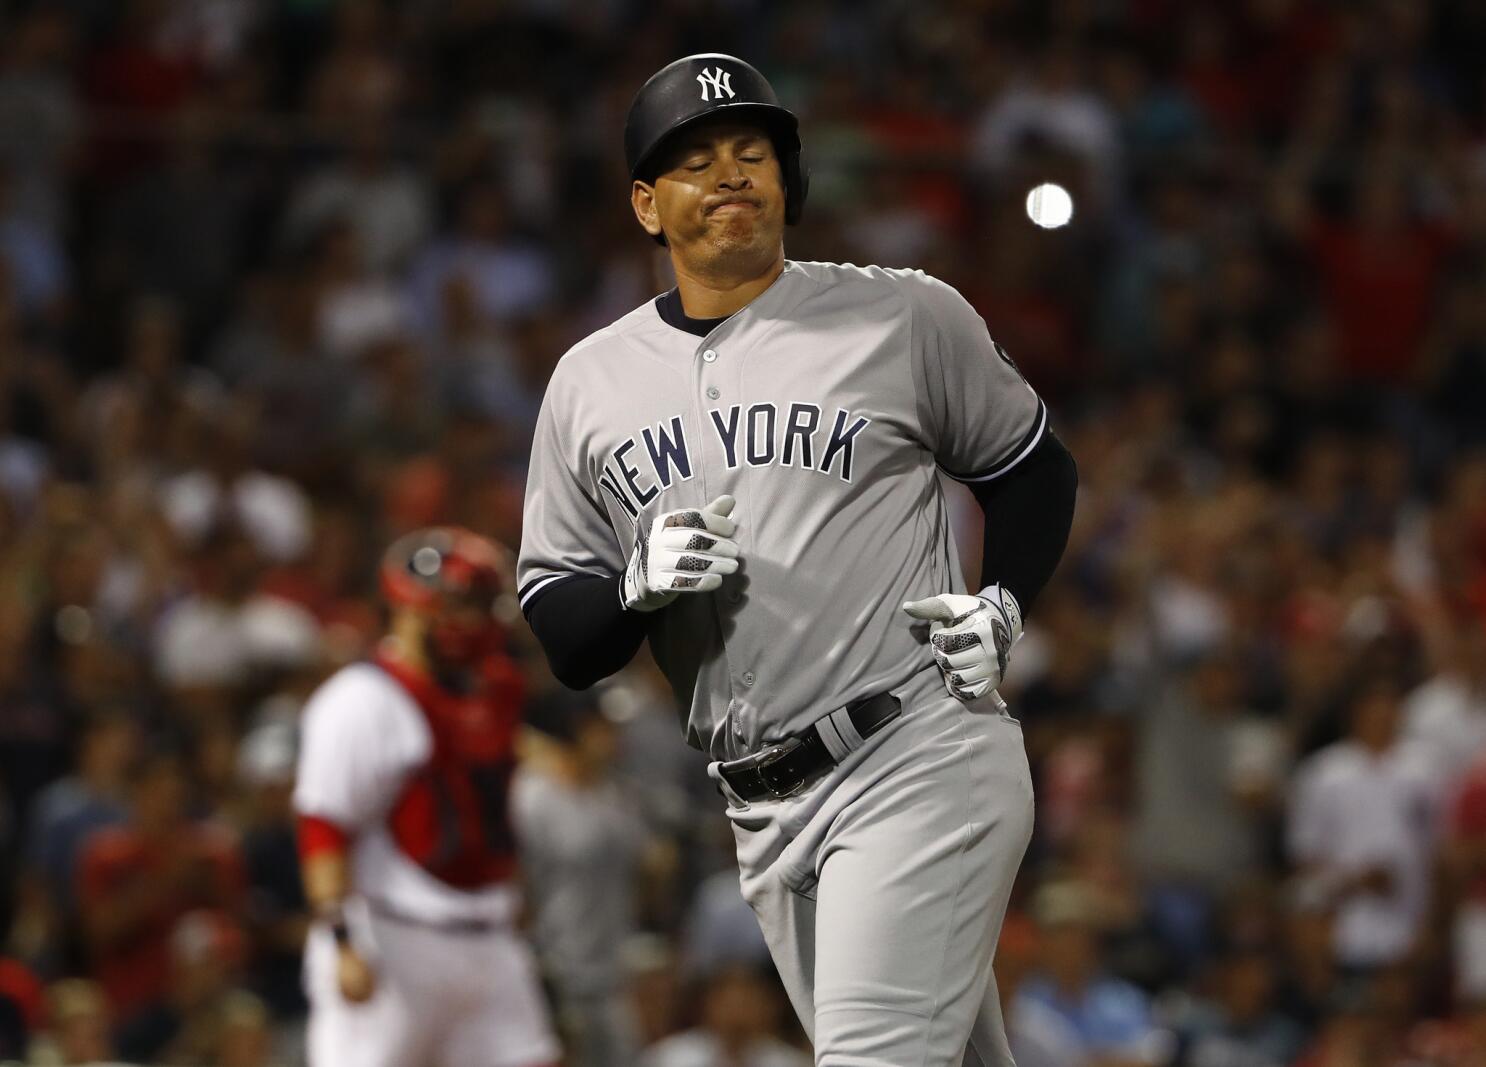 Alex Rodriguez wanted to play third base for his final game, but